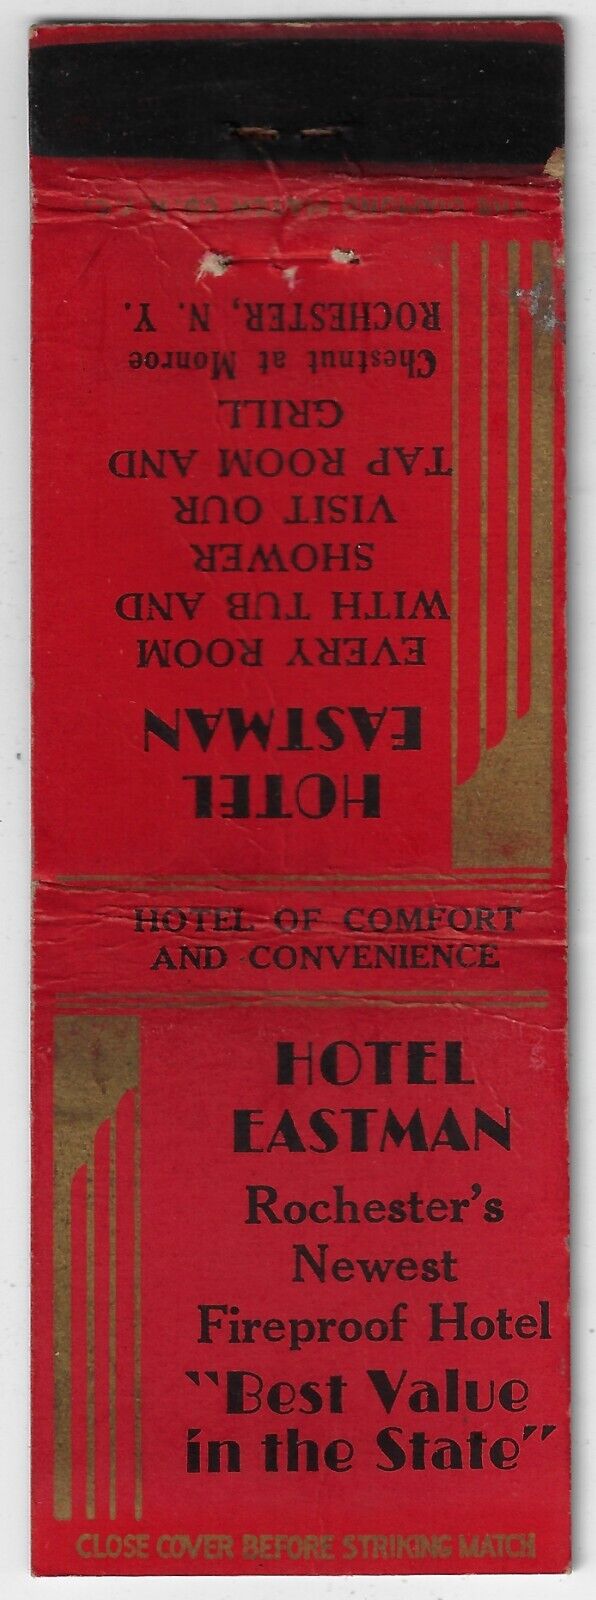 Hotel Eastman Rochester NY Tub and Shower in every room FS Empty Matchbook Cover